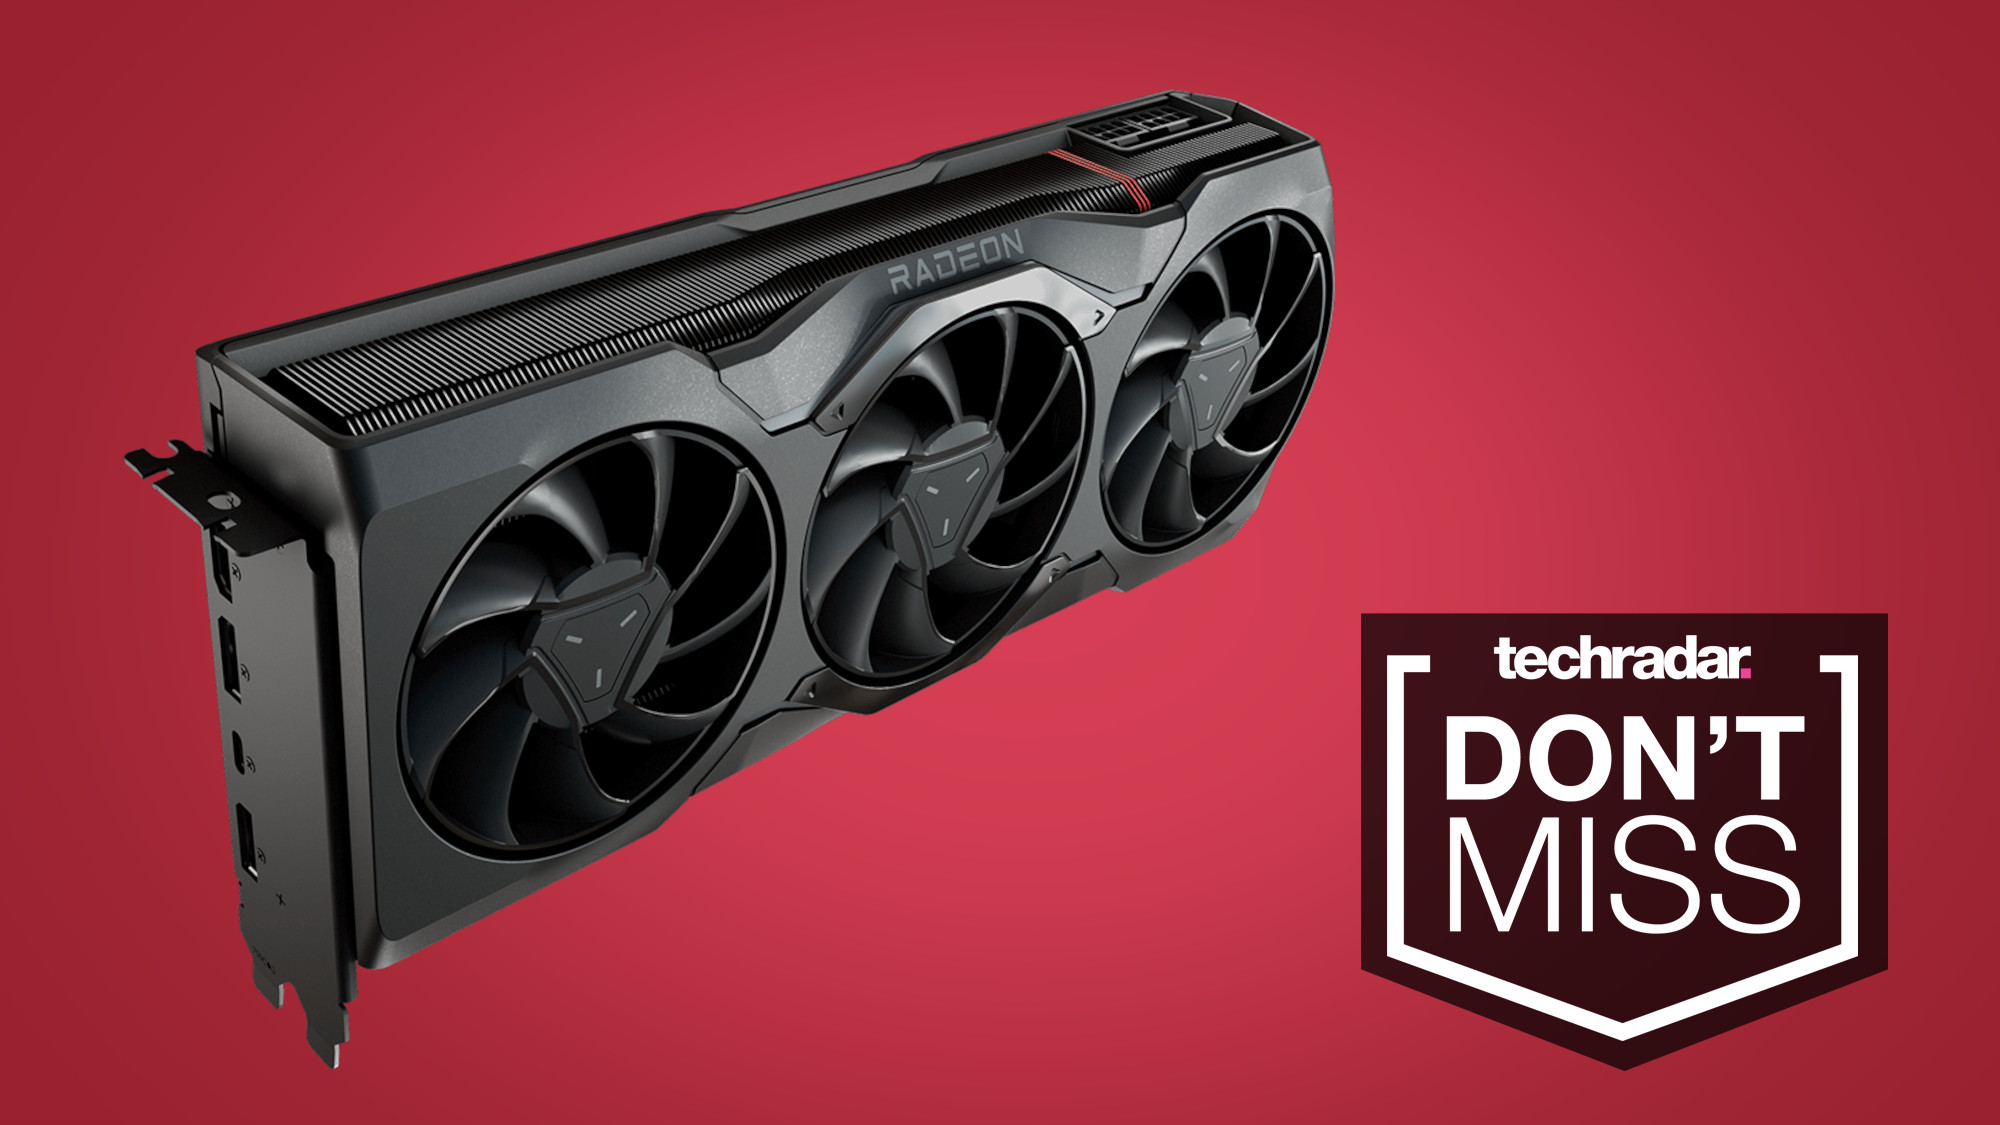 AMD Radeon RX 7900 XTX graphics card on a red background with a TechRadar badge that reads 'DON'T MISS'.